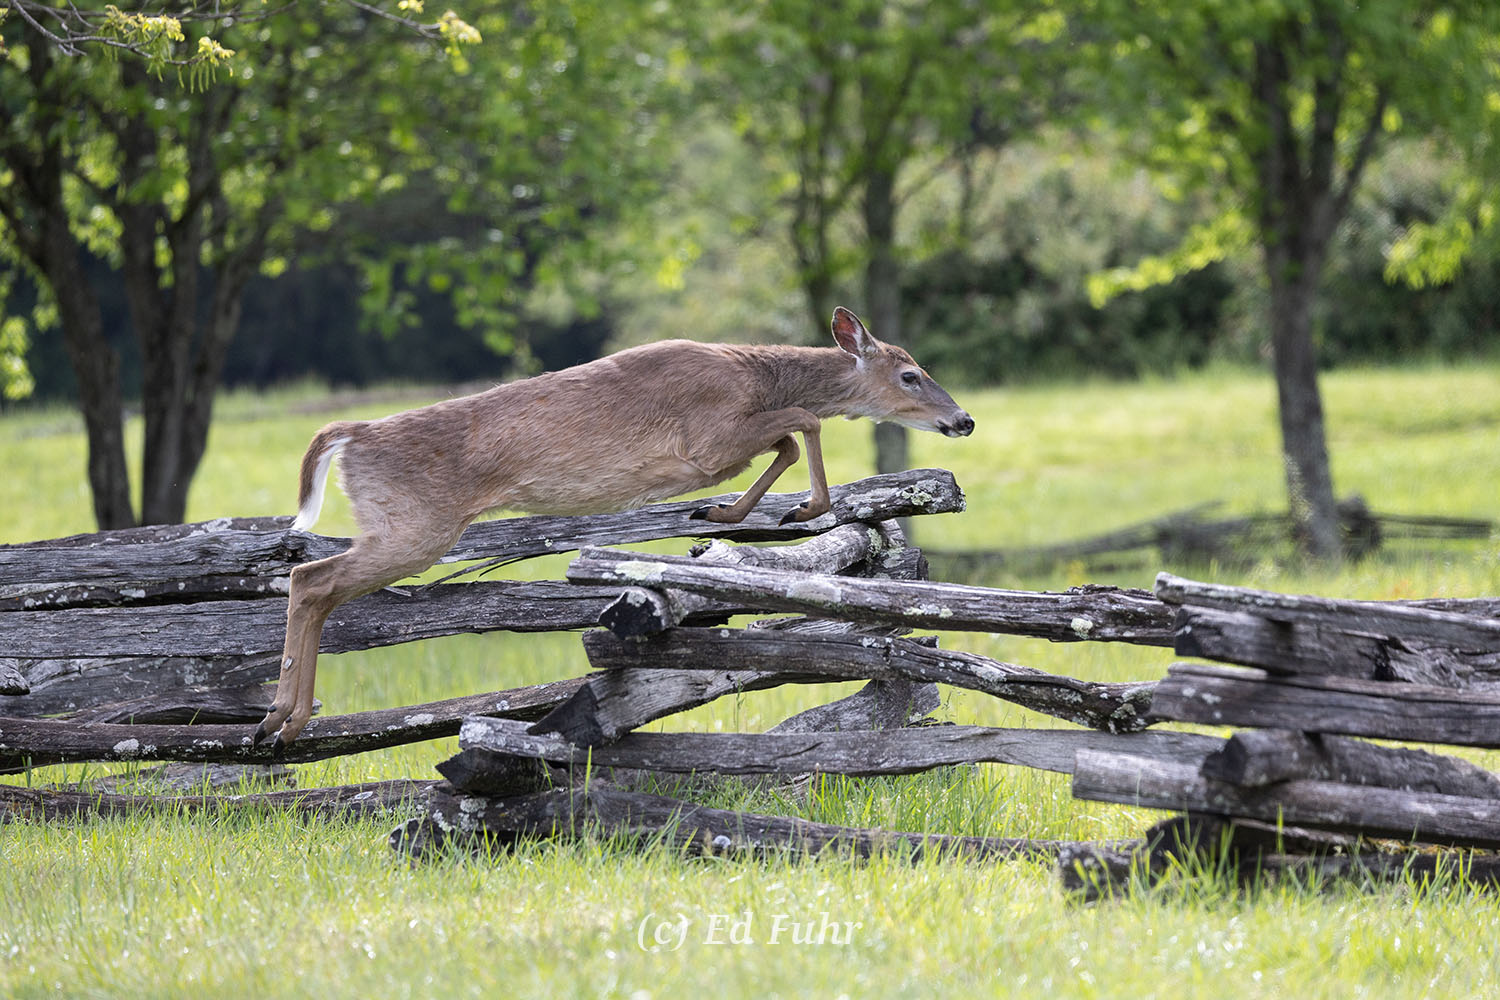 The day is advancing and it is time for this doe to leave the meadows for the cool and protection of the nearby forest.